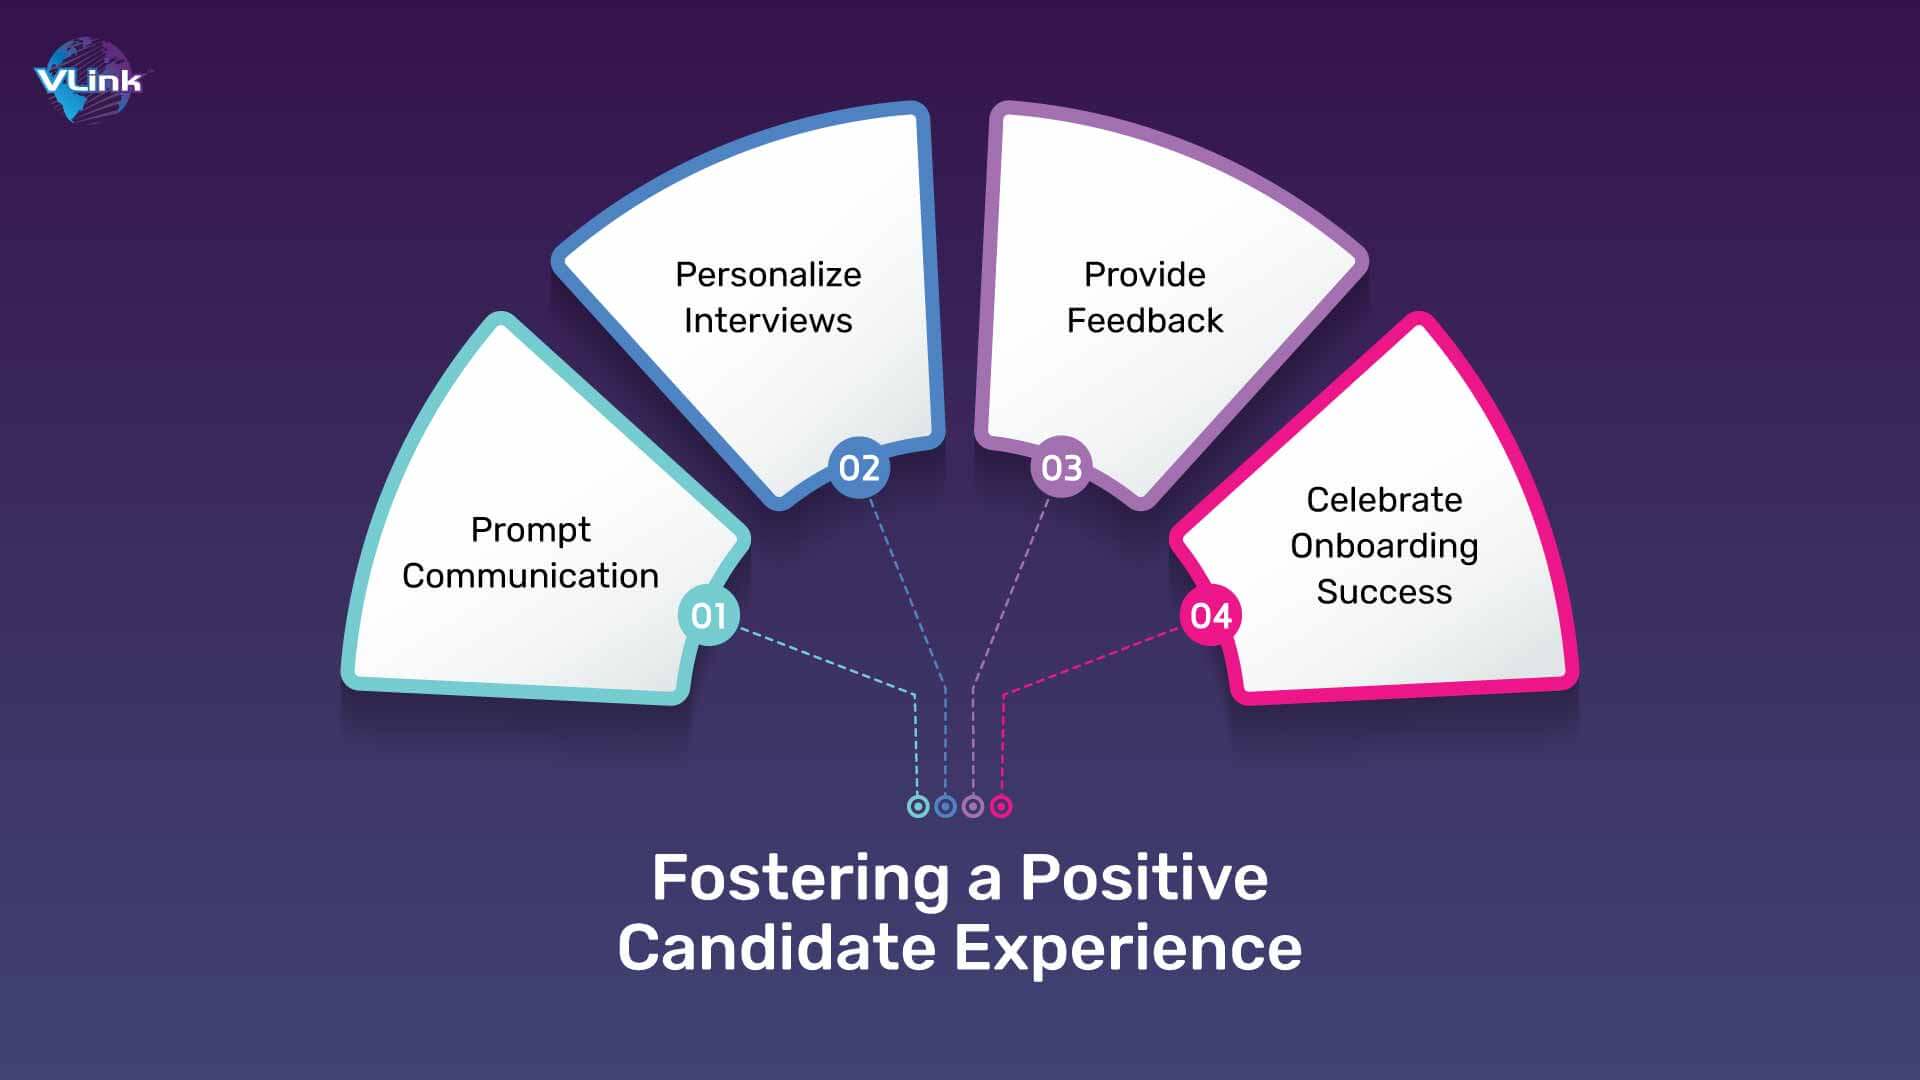 Fostering a Positive Candidate Experience